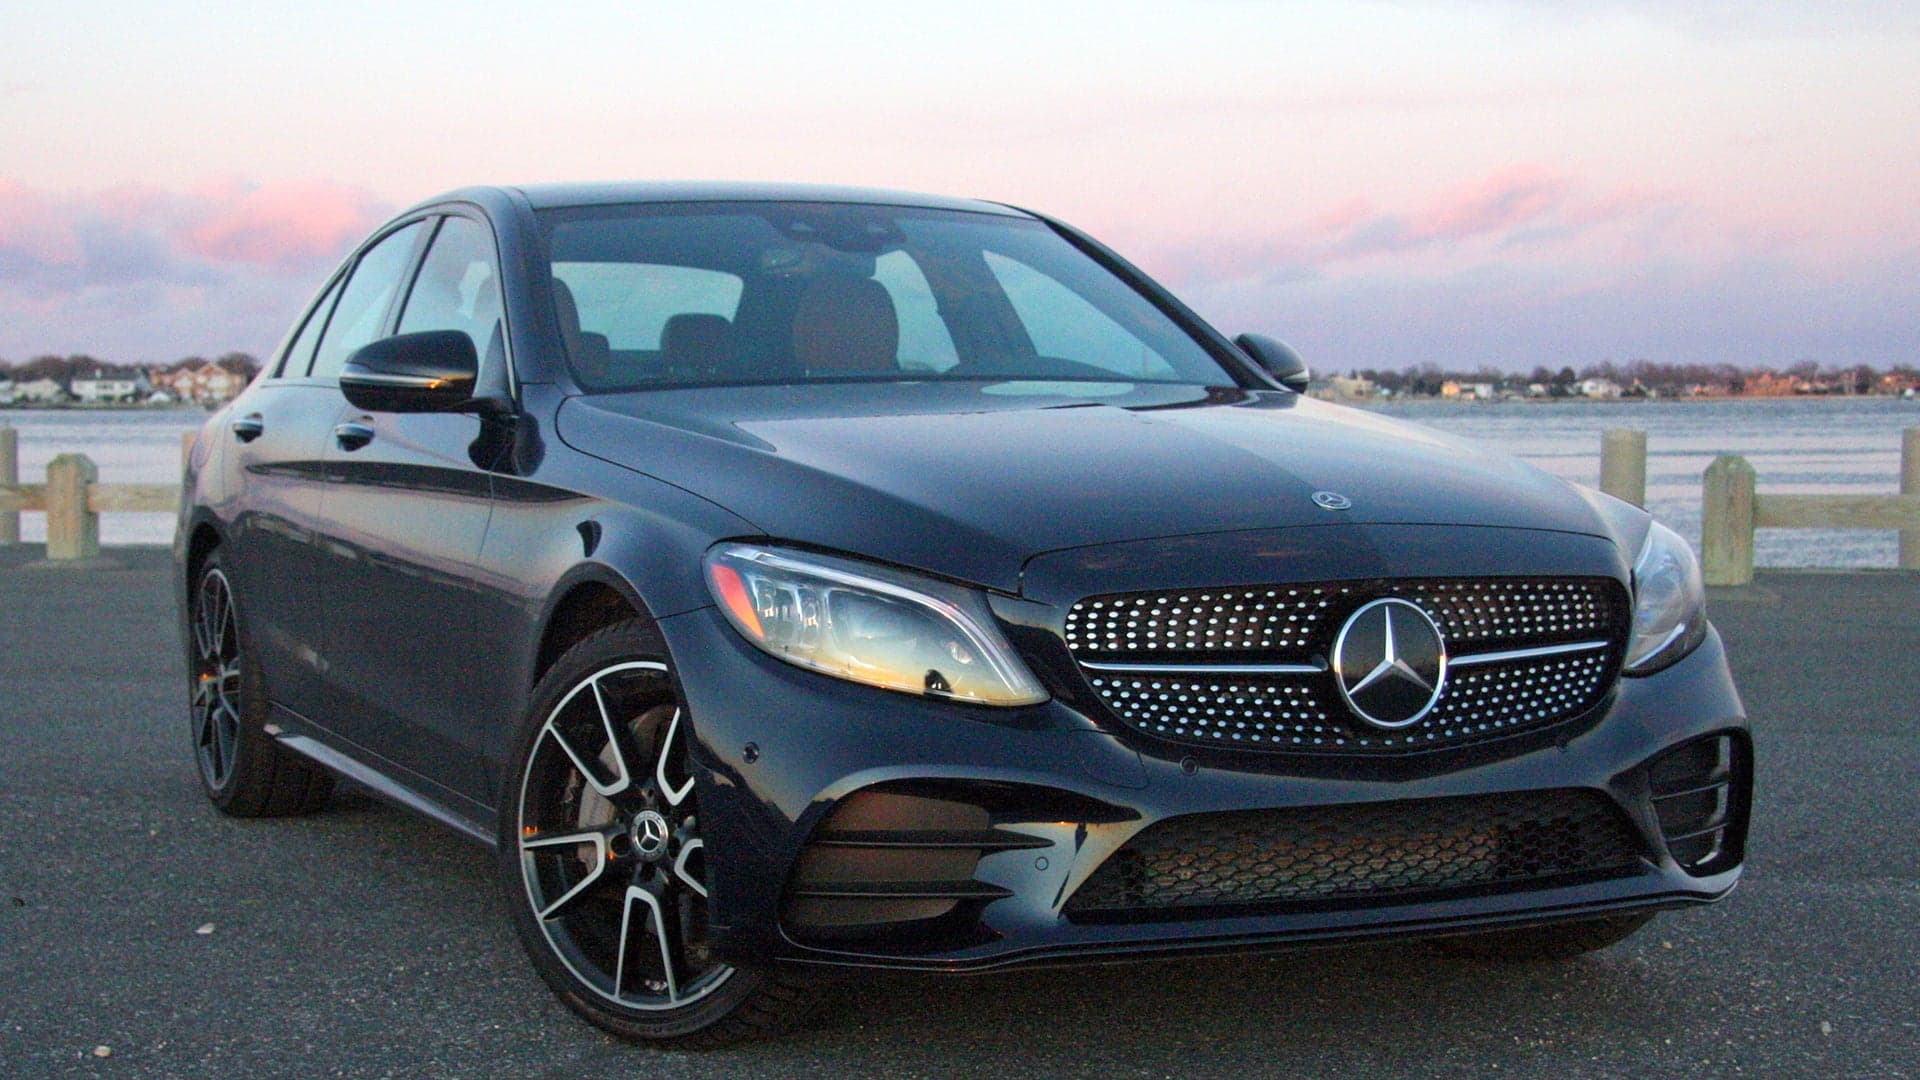 2019 Mercedes-Benz C300 New Dad Review: What Good Is Prestige for Parents Without Space?